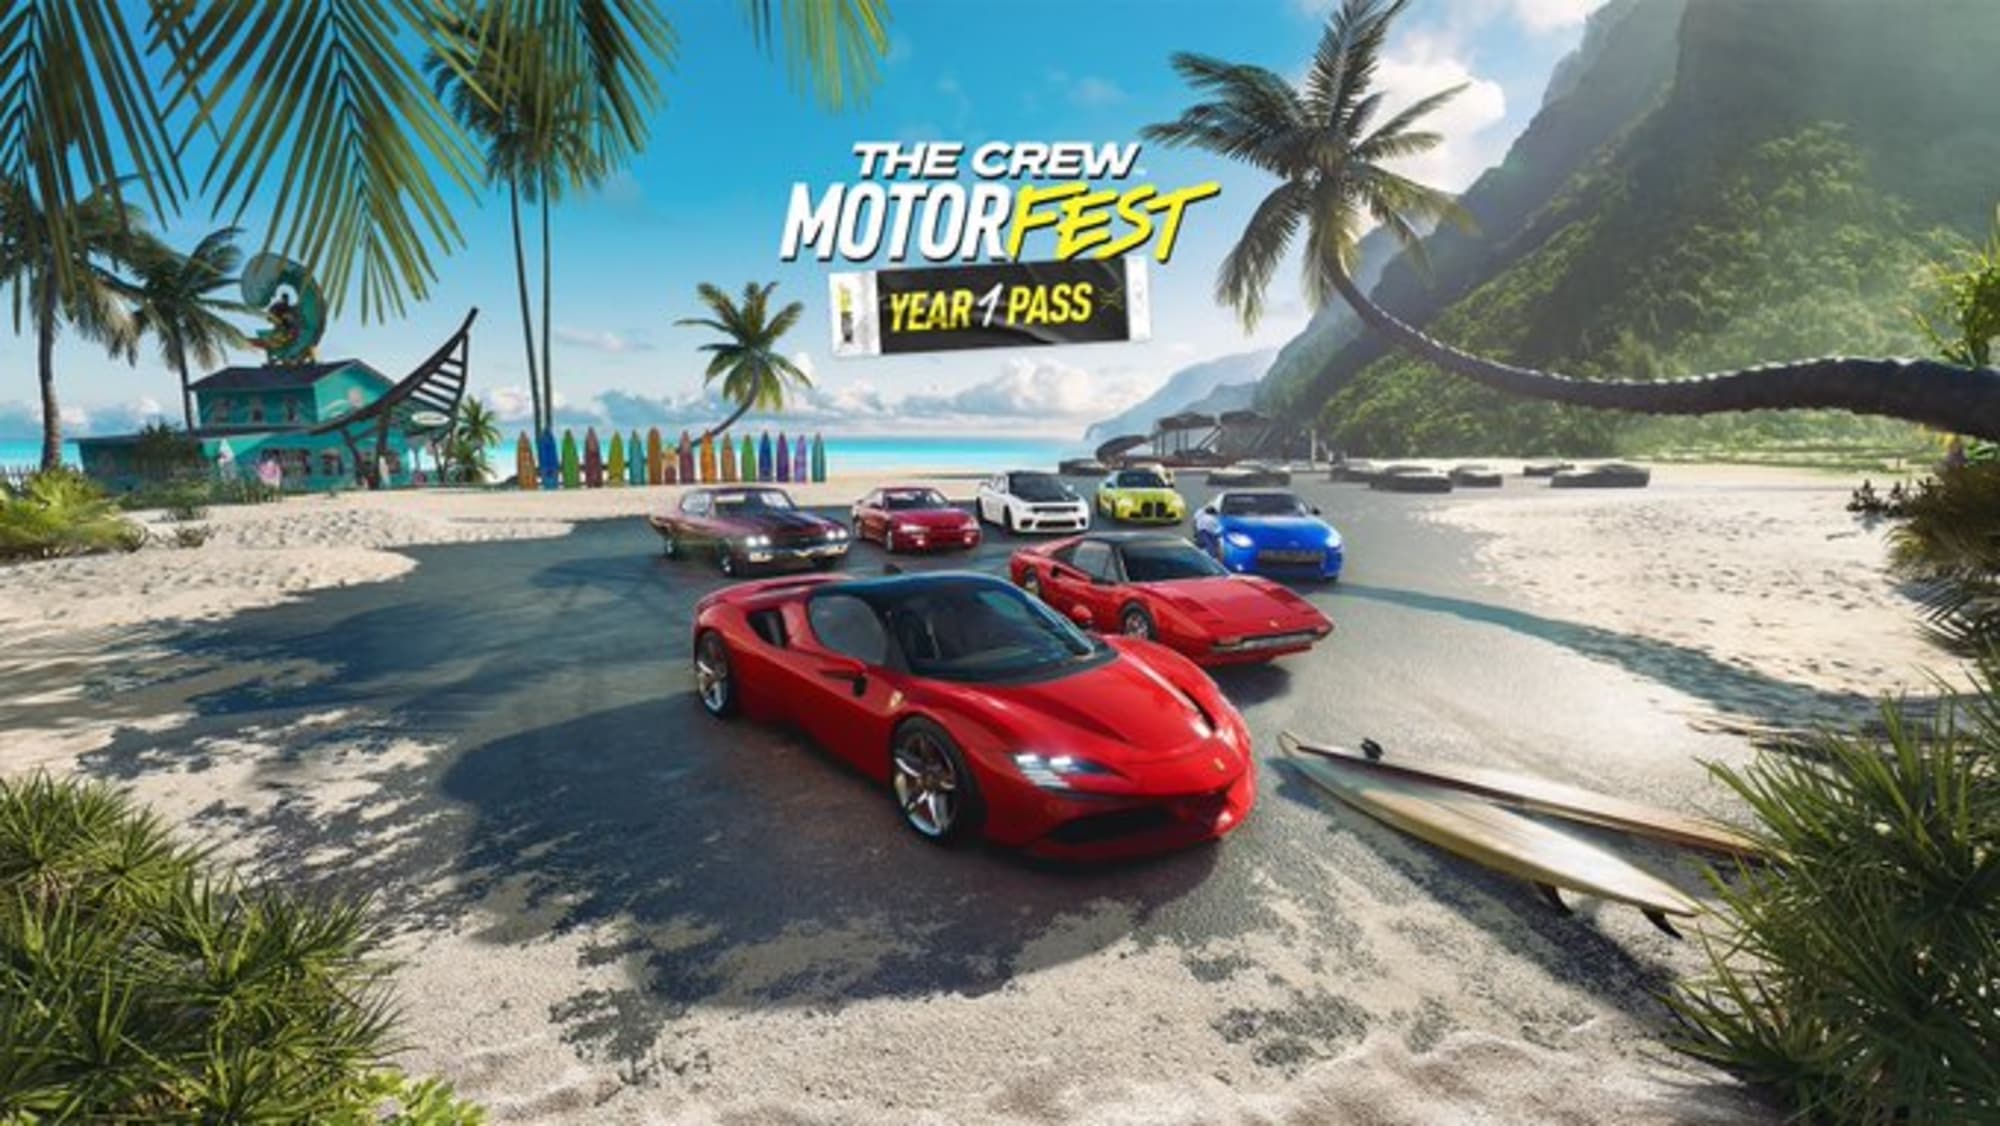 The Crew Motorfest Officially Announced, Launching In 2023